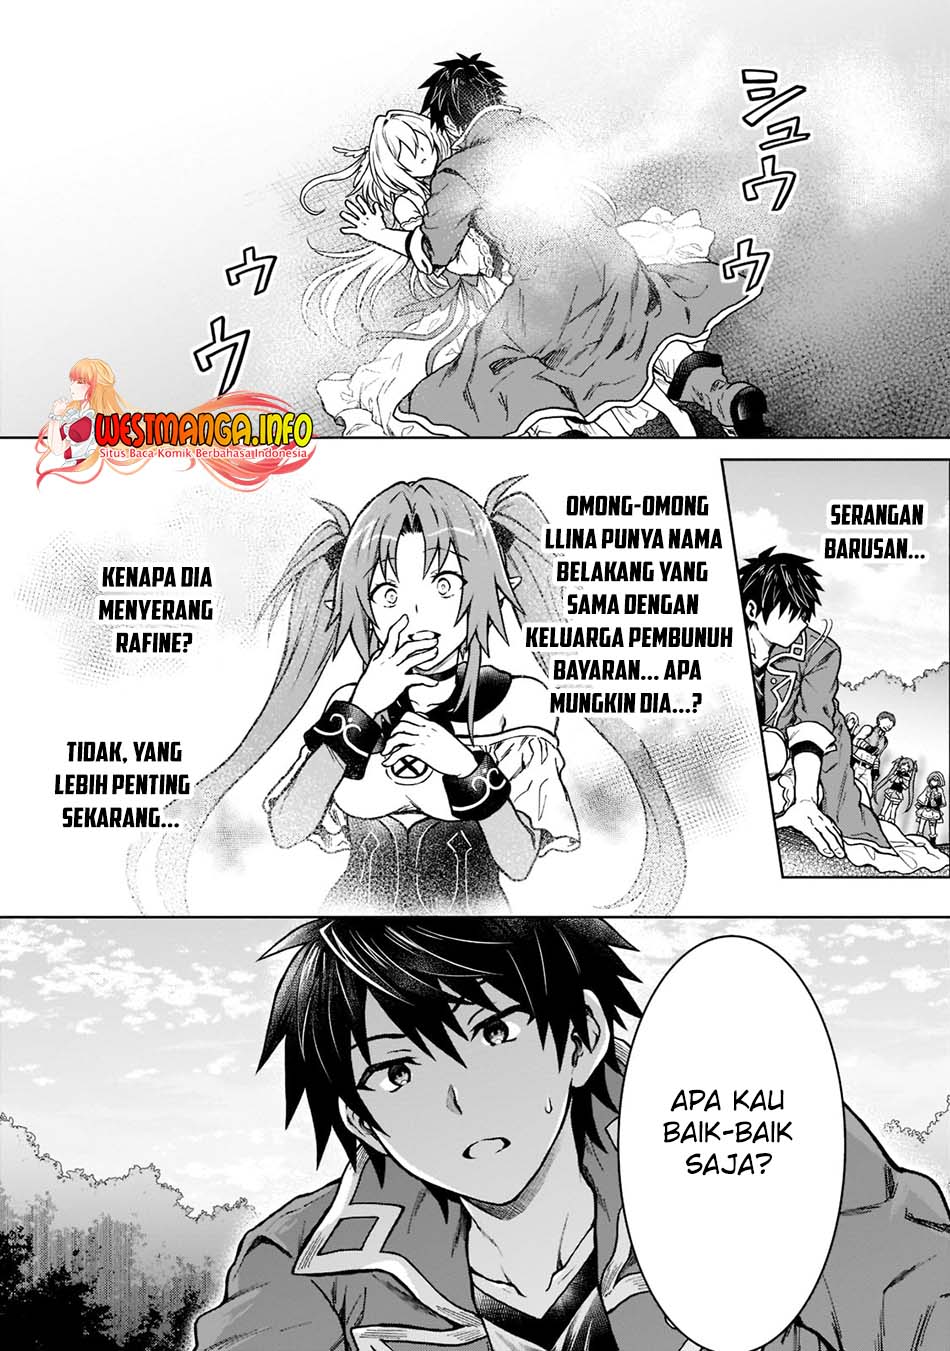 Dilarang COPAS - situs resmi www.mangacanblog.com - Komik d rank adventurer invited by a brave party and the stalking princess 011 - chapter 11 12 Indonesia d rank adventurer invited by a brave party and the stalking princess 011 - chapter 11 Terbaru 28|Baca Manga Komik Indonesia|Mangacan